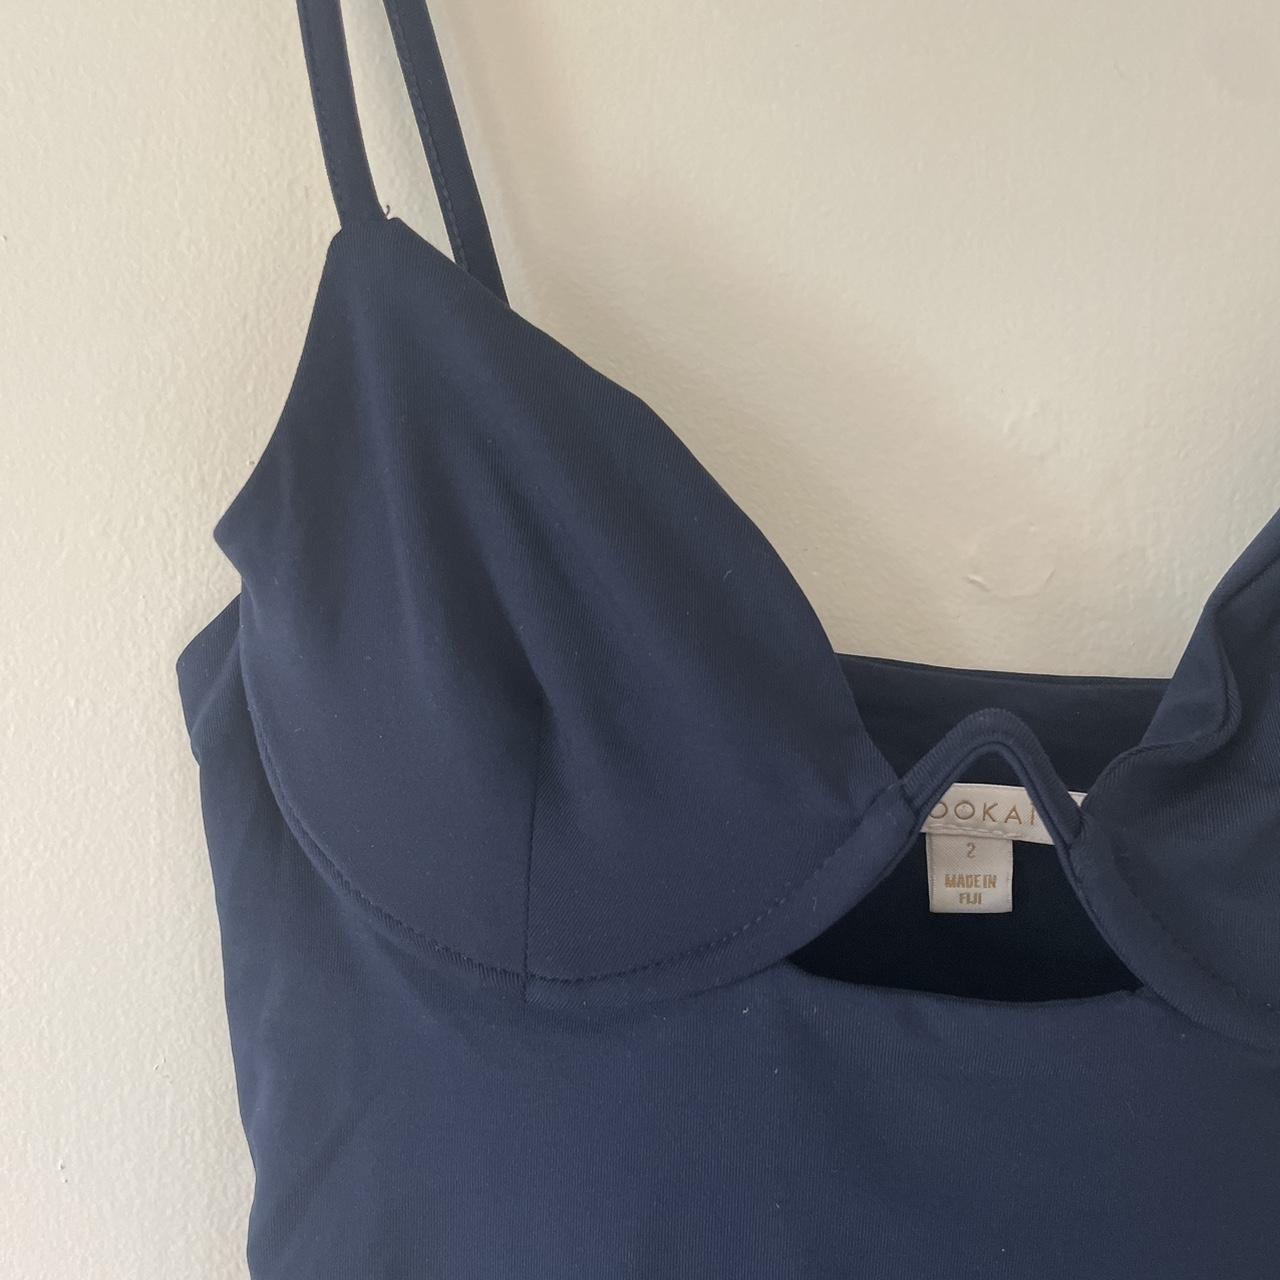 Kookai navy blue going out top with underwire 🌀 - Depop